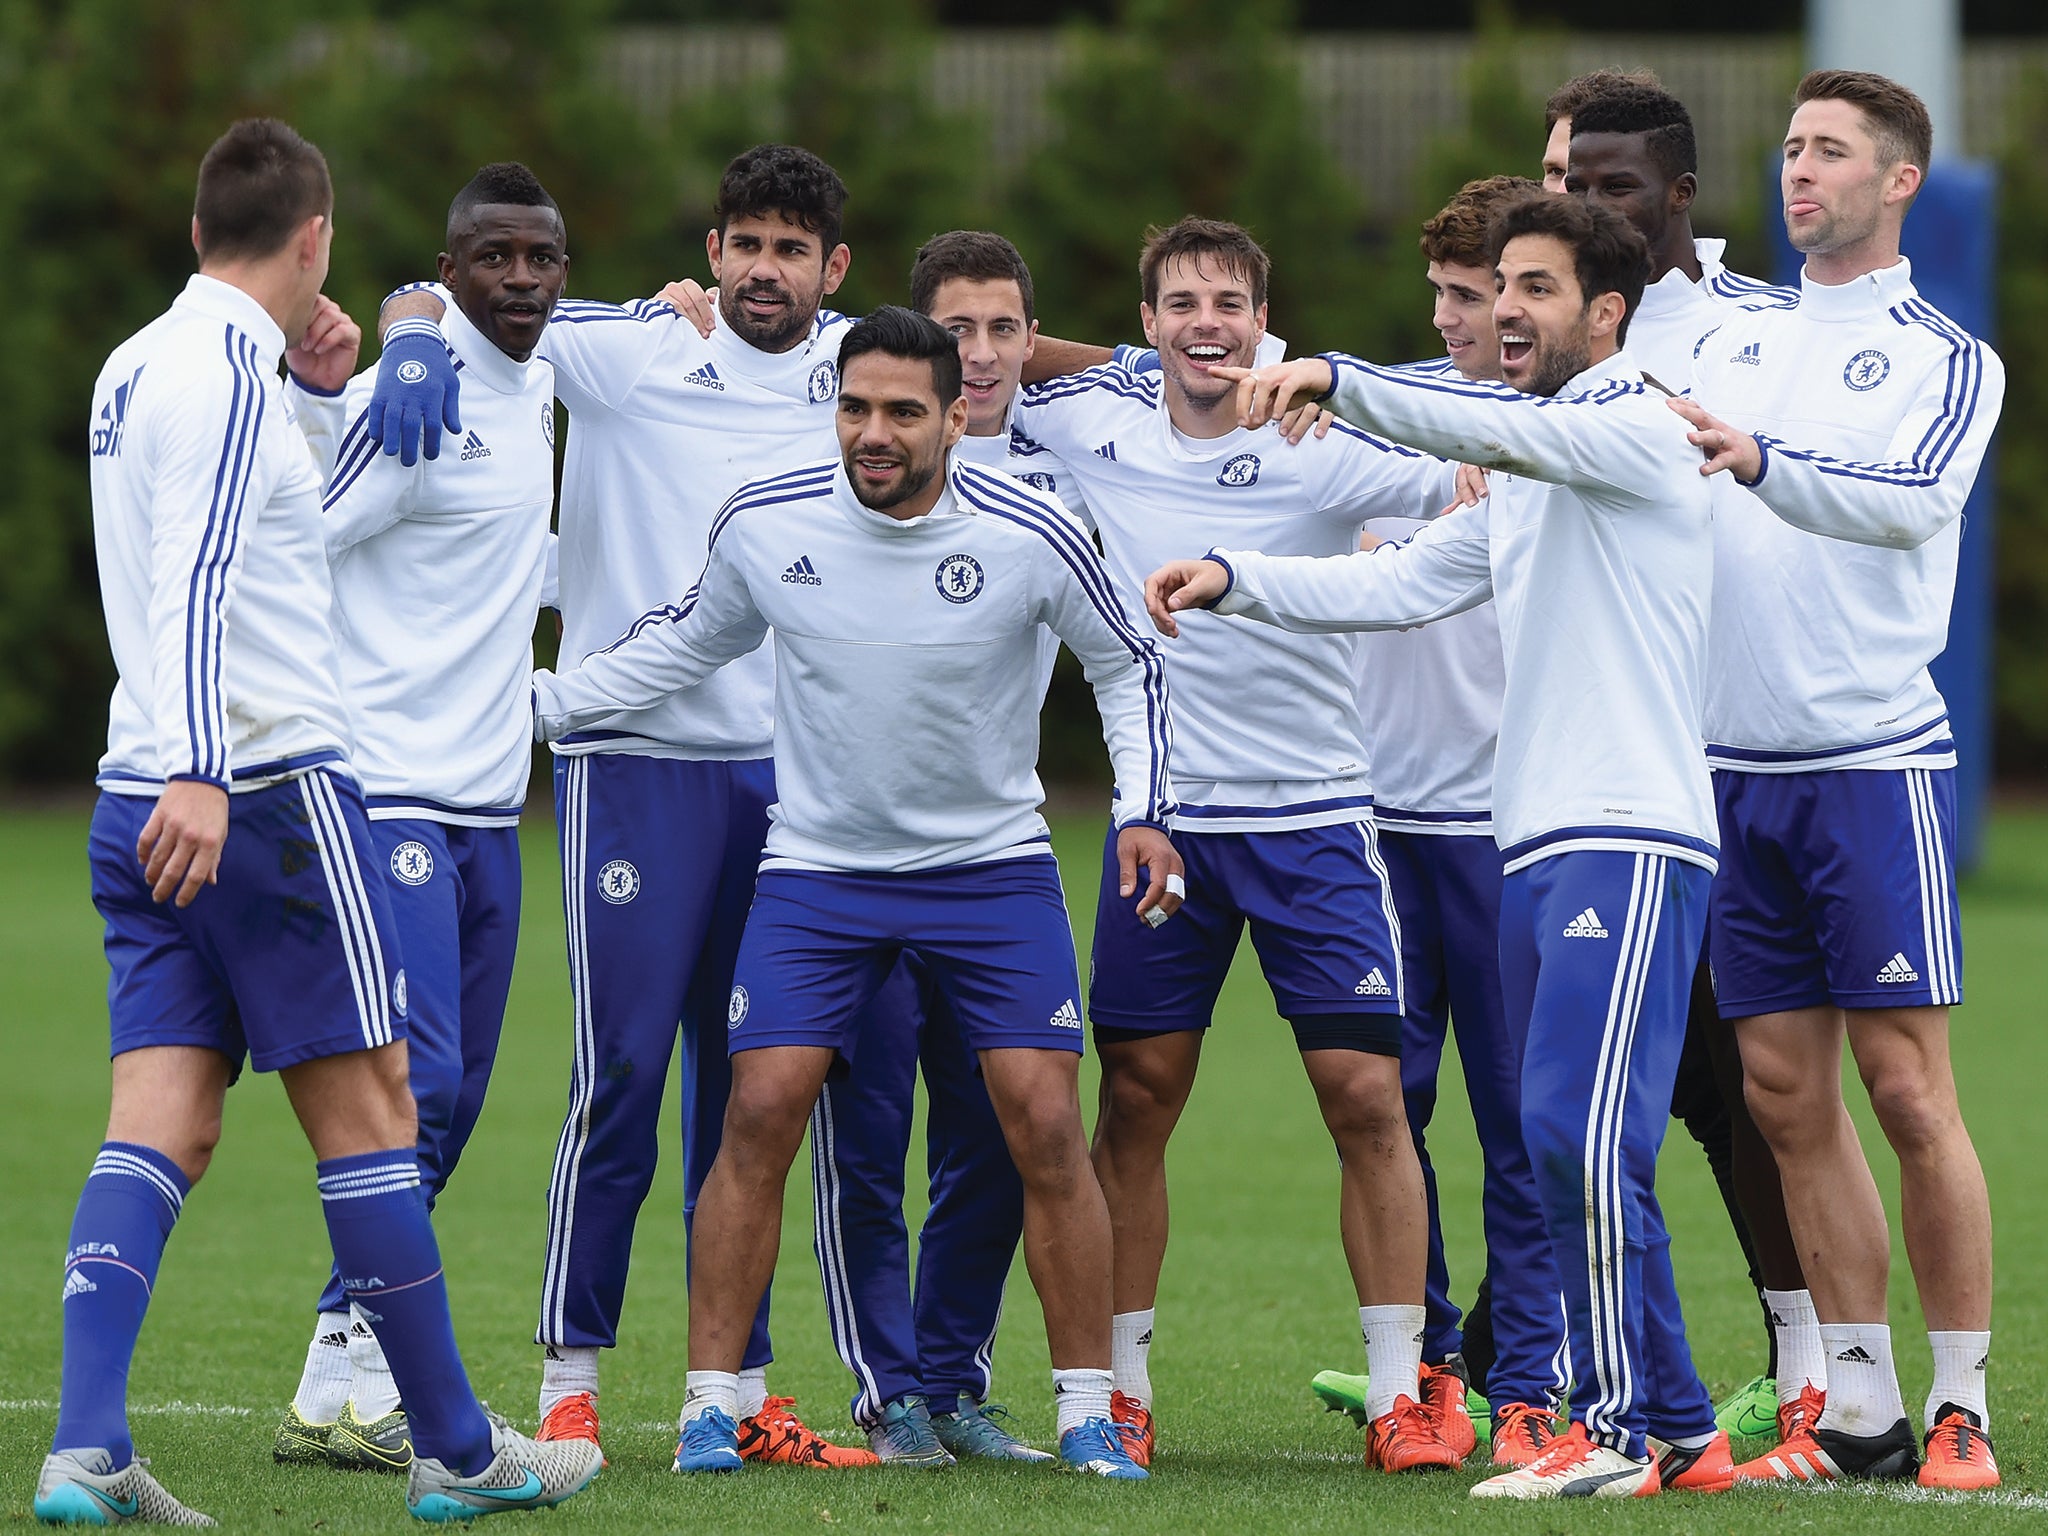 Members of the Chelsea FC squad during a training session